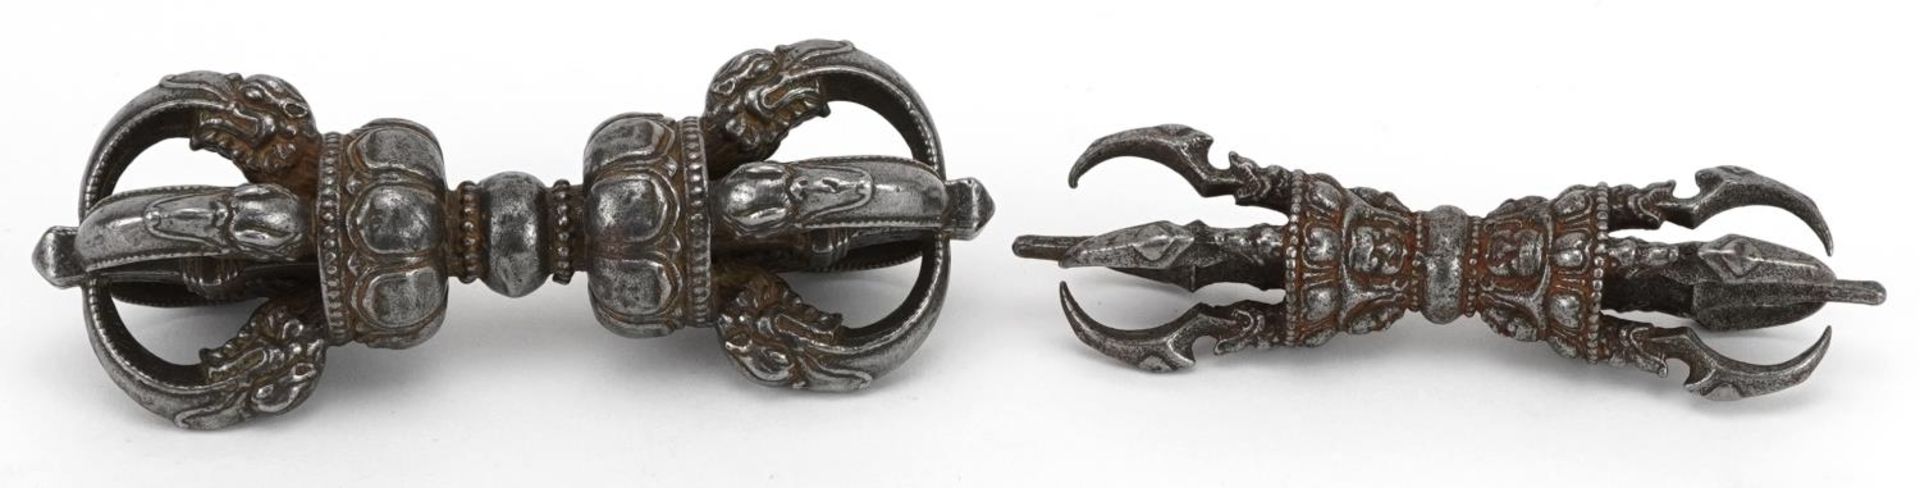 Two Tibetan cast white metal dorjes, the largest 13cm wide : For further information on this lot